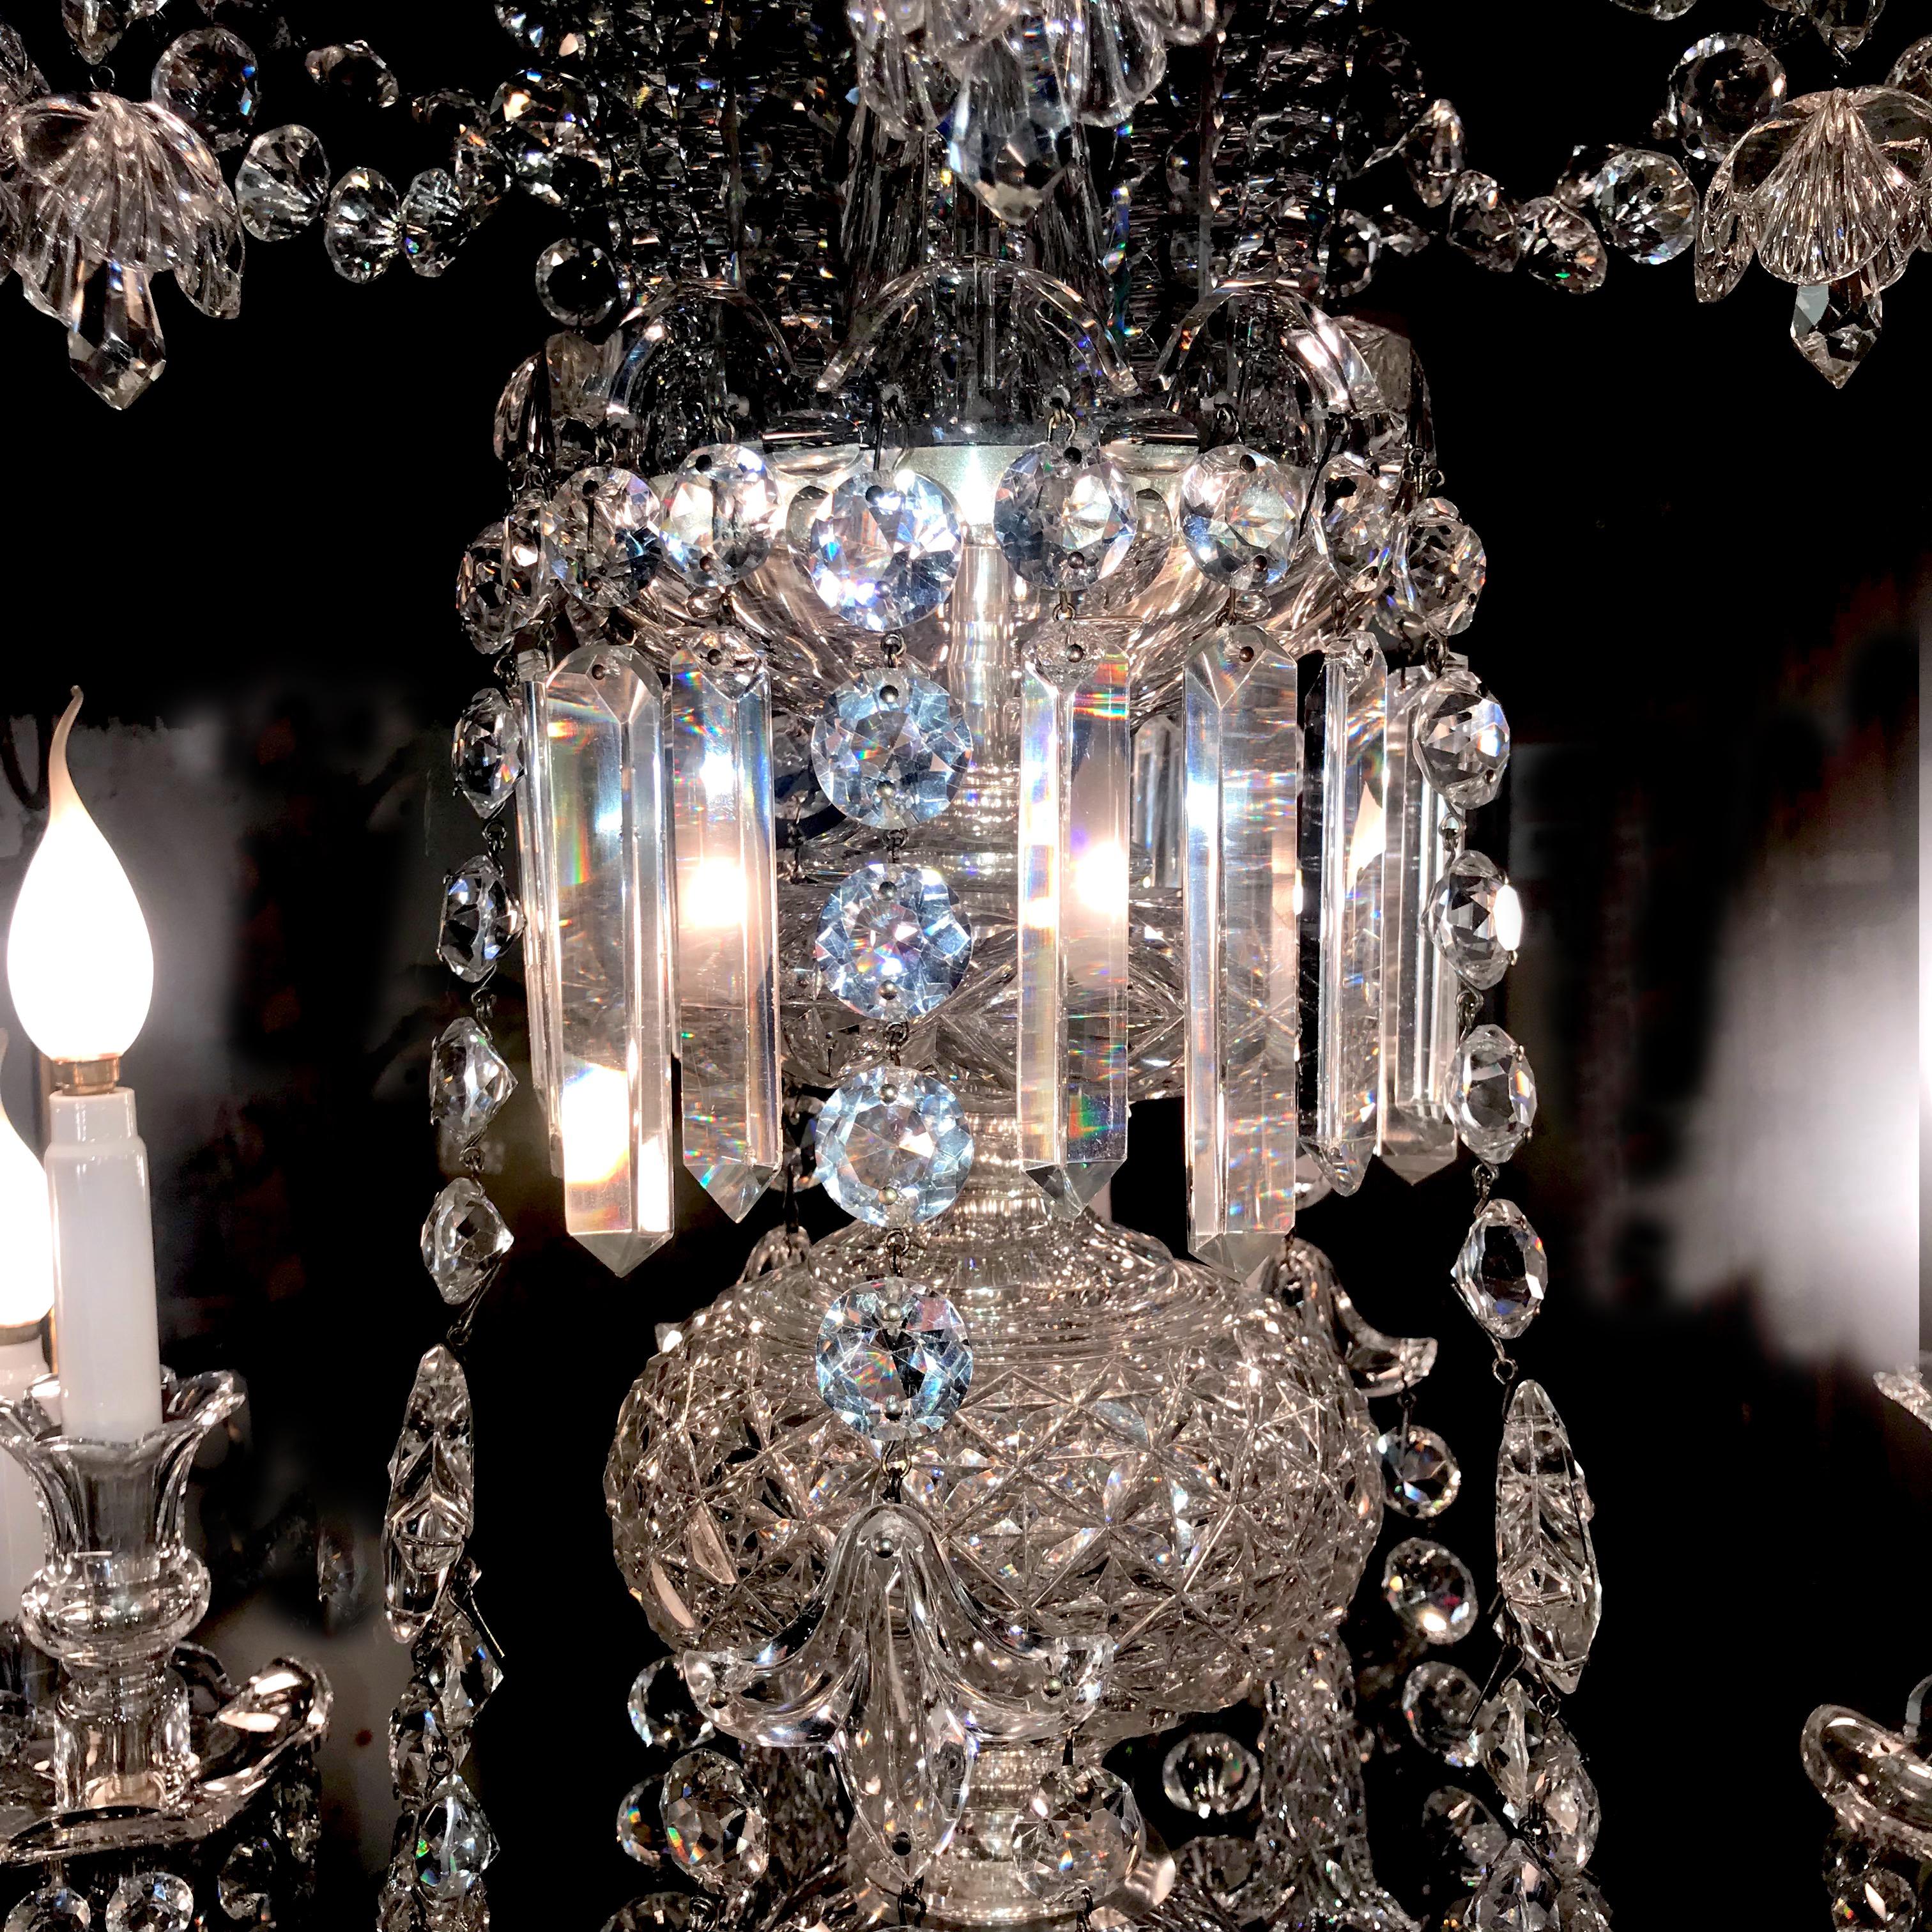 Baccarat Crystal Exceptional Chandelier, France, Early 19th Century For Sale 9